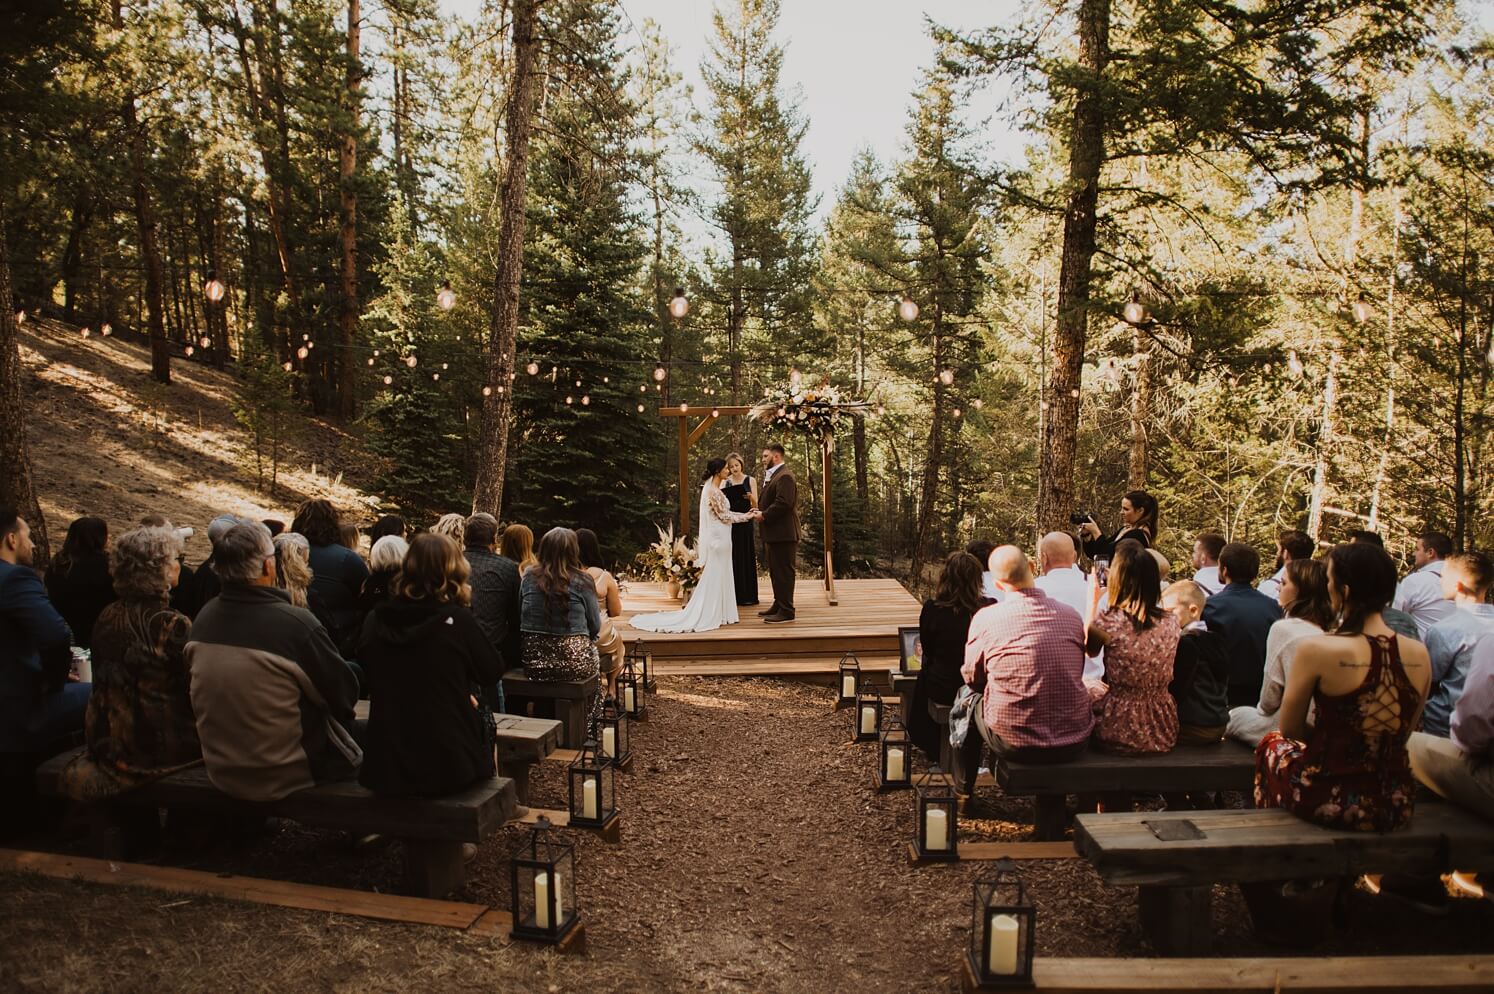 Bride and groom exchanging vows at Evergreen wedding venue | McArthur Weddings and Events